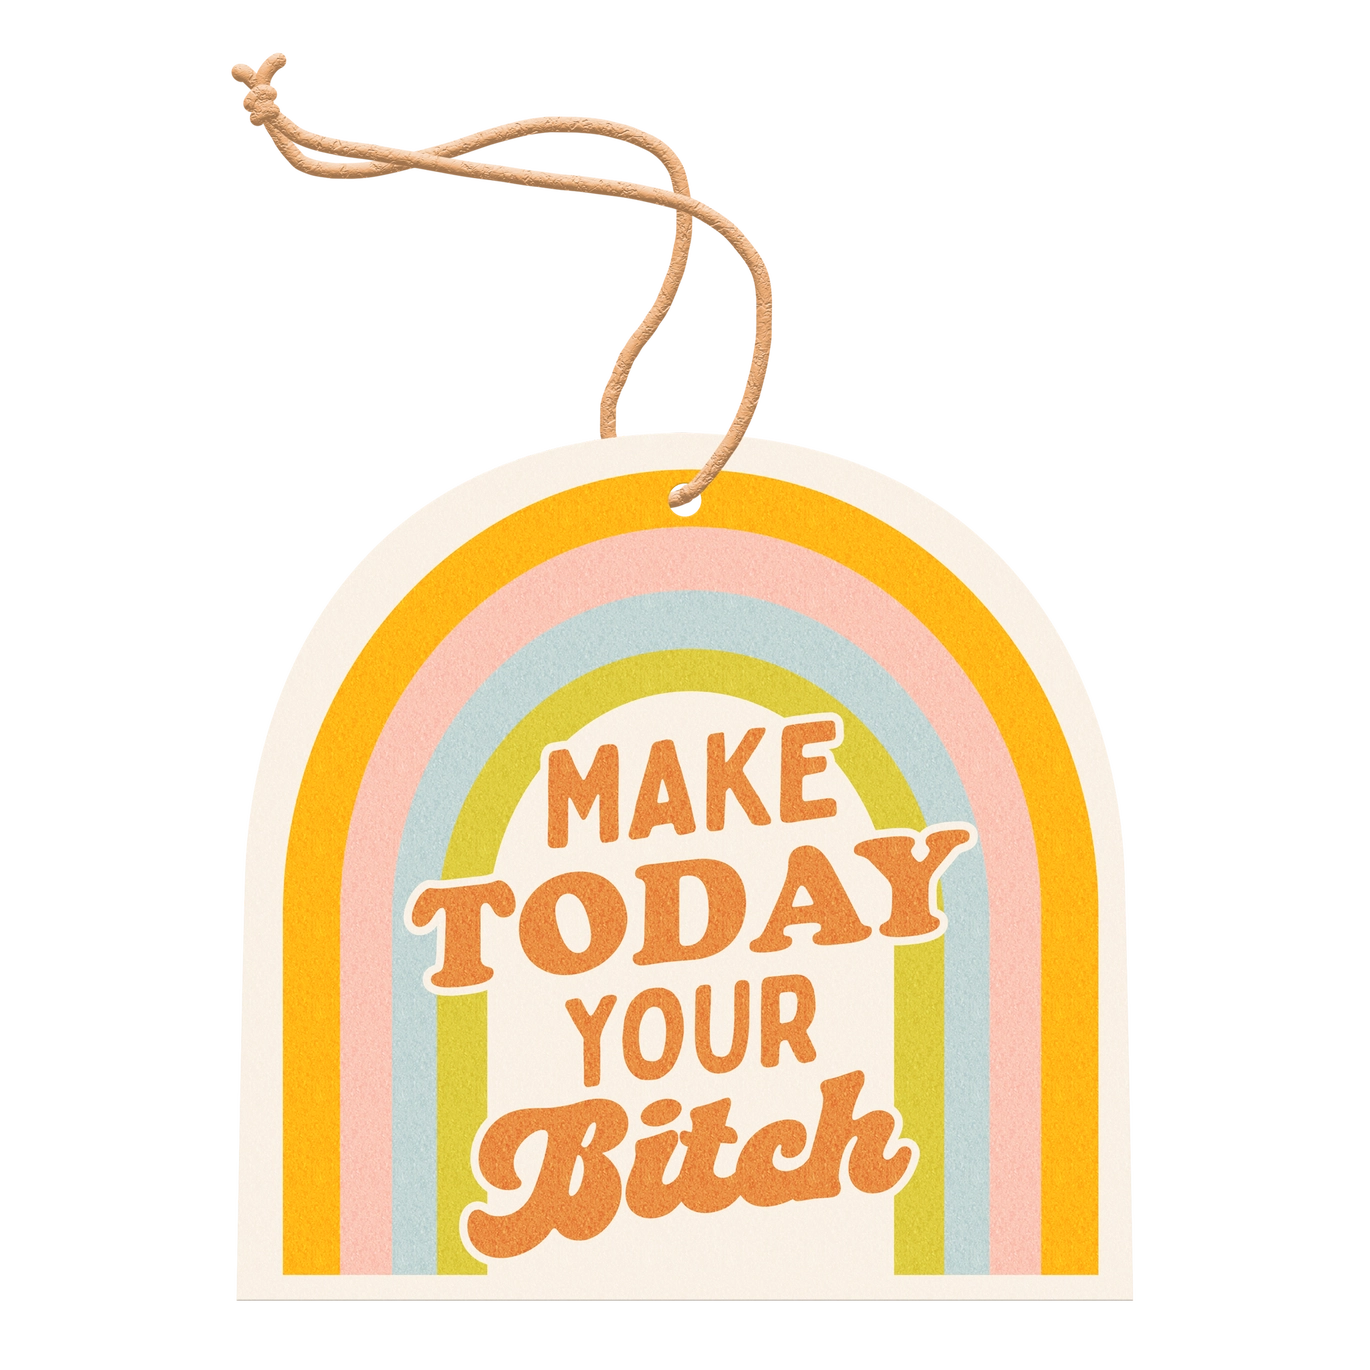 Make today your "B" - Air Freshener